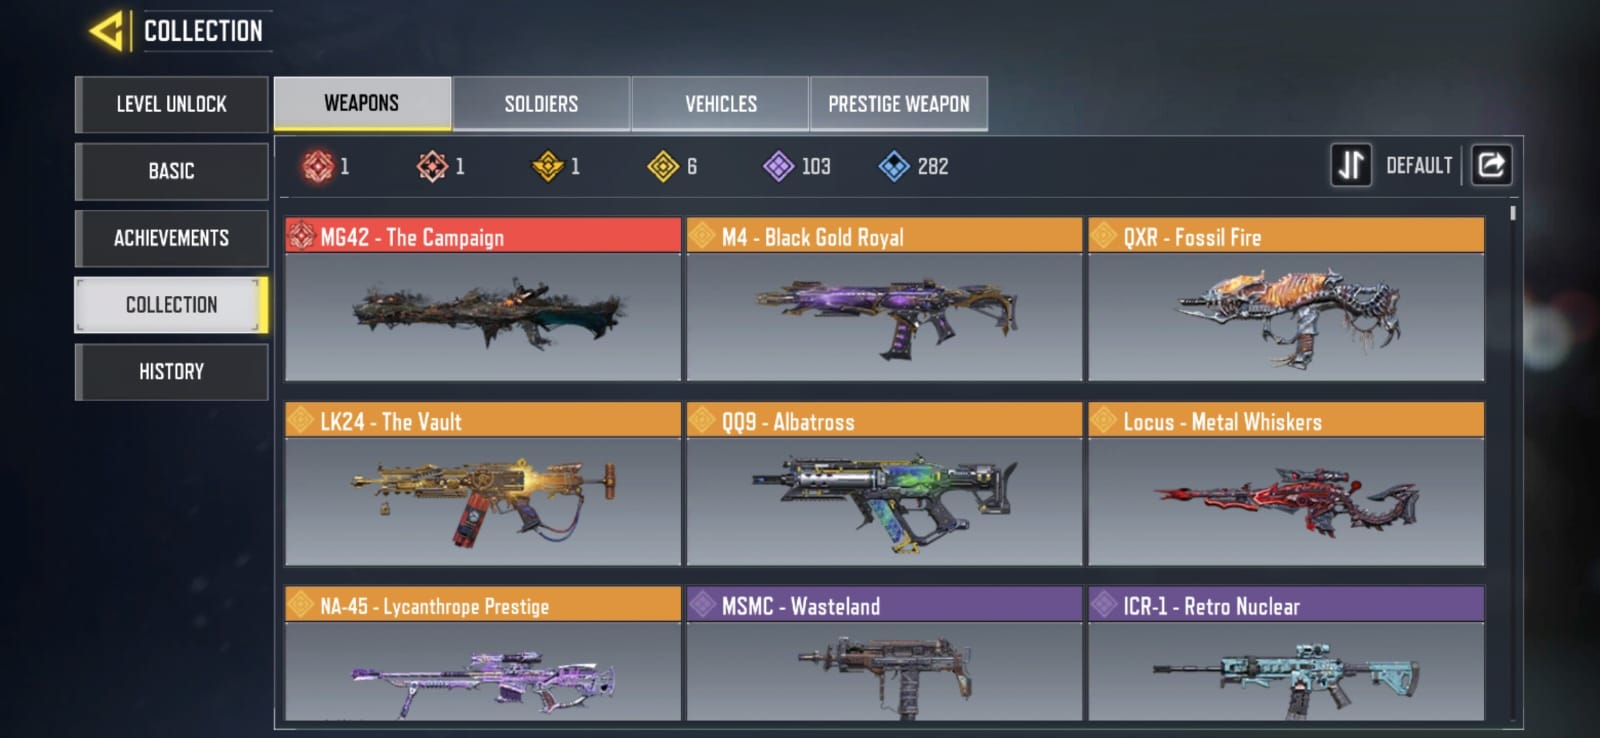 CODM Account with mythic and legendary guns as well as presitge